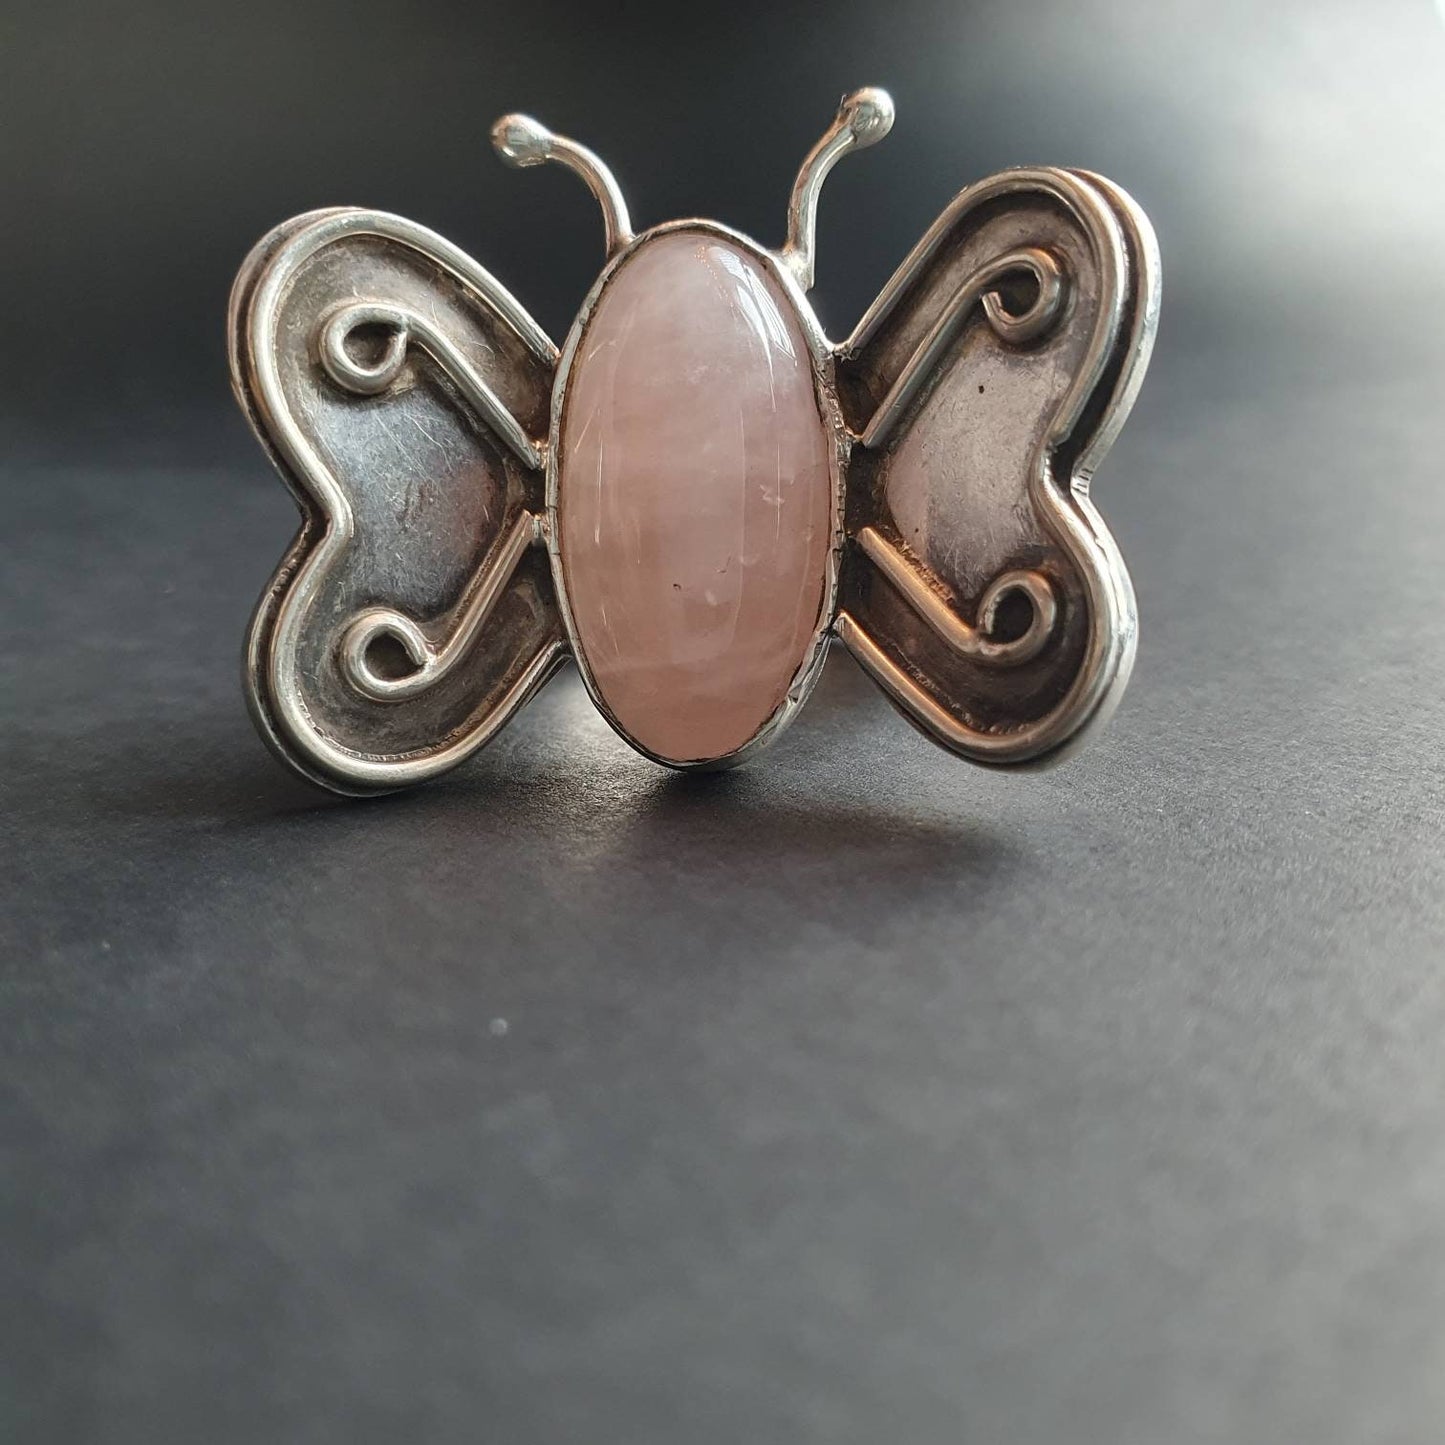 Butterfly jewellery, Butterfly ring rose quartz gemstone, sterling silver Butterfly large chunky statement ring, funky vibe eccentric style